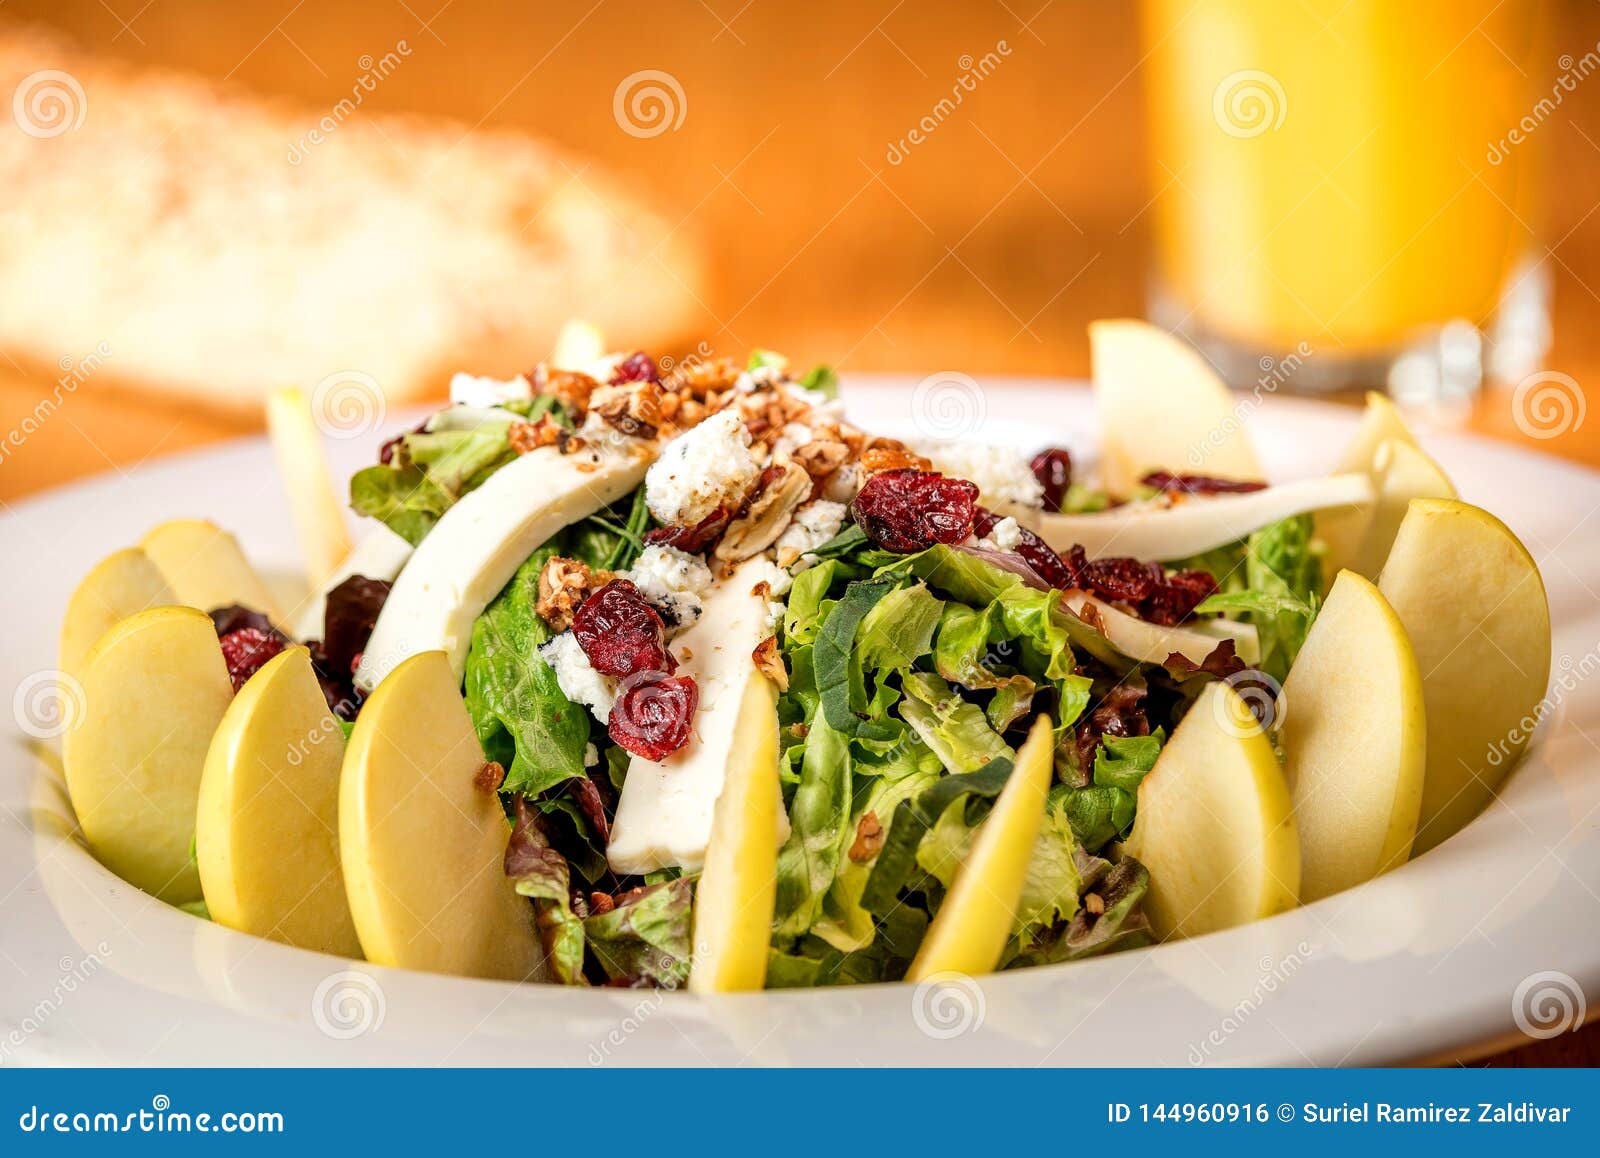 apple, cheese and lettuce salad healthy food